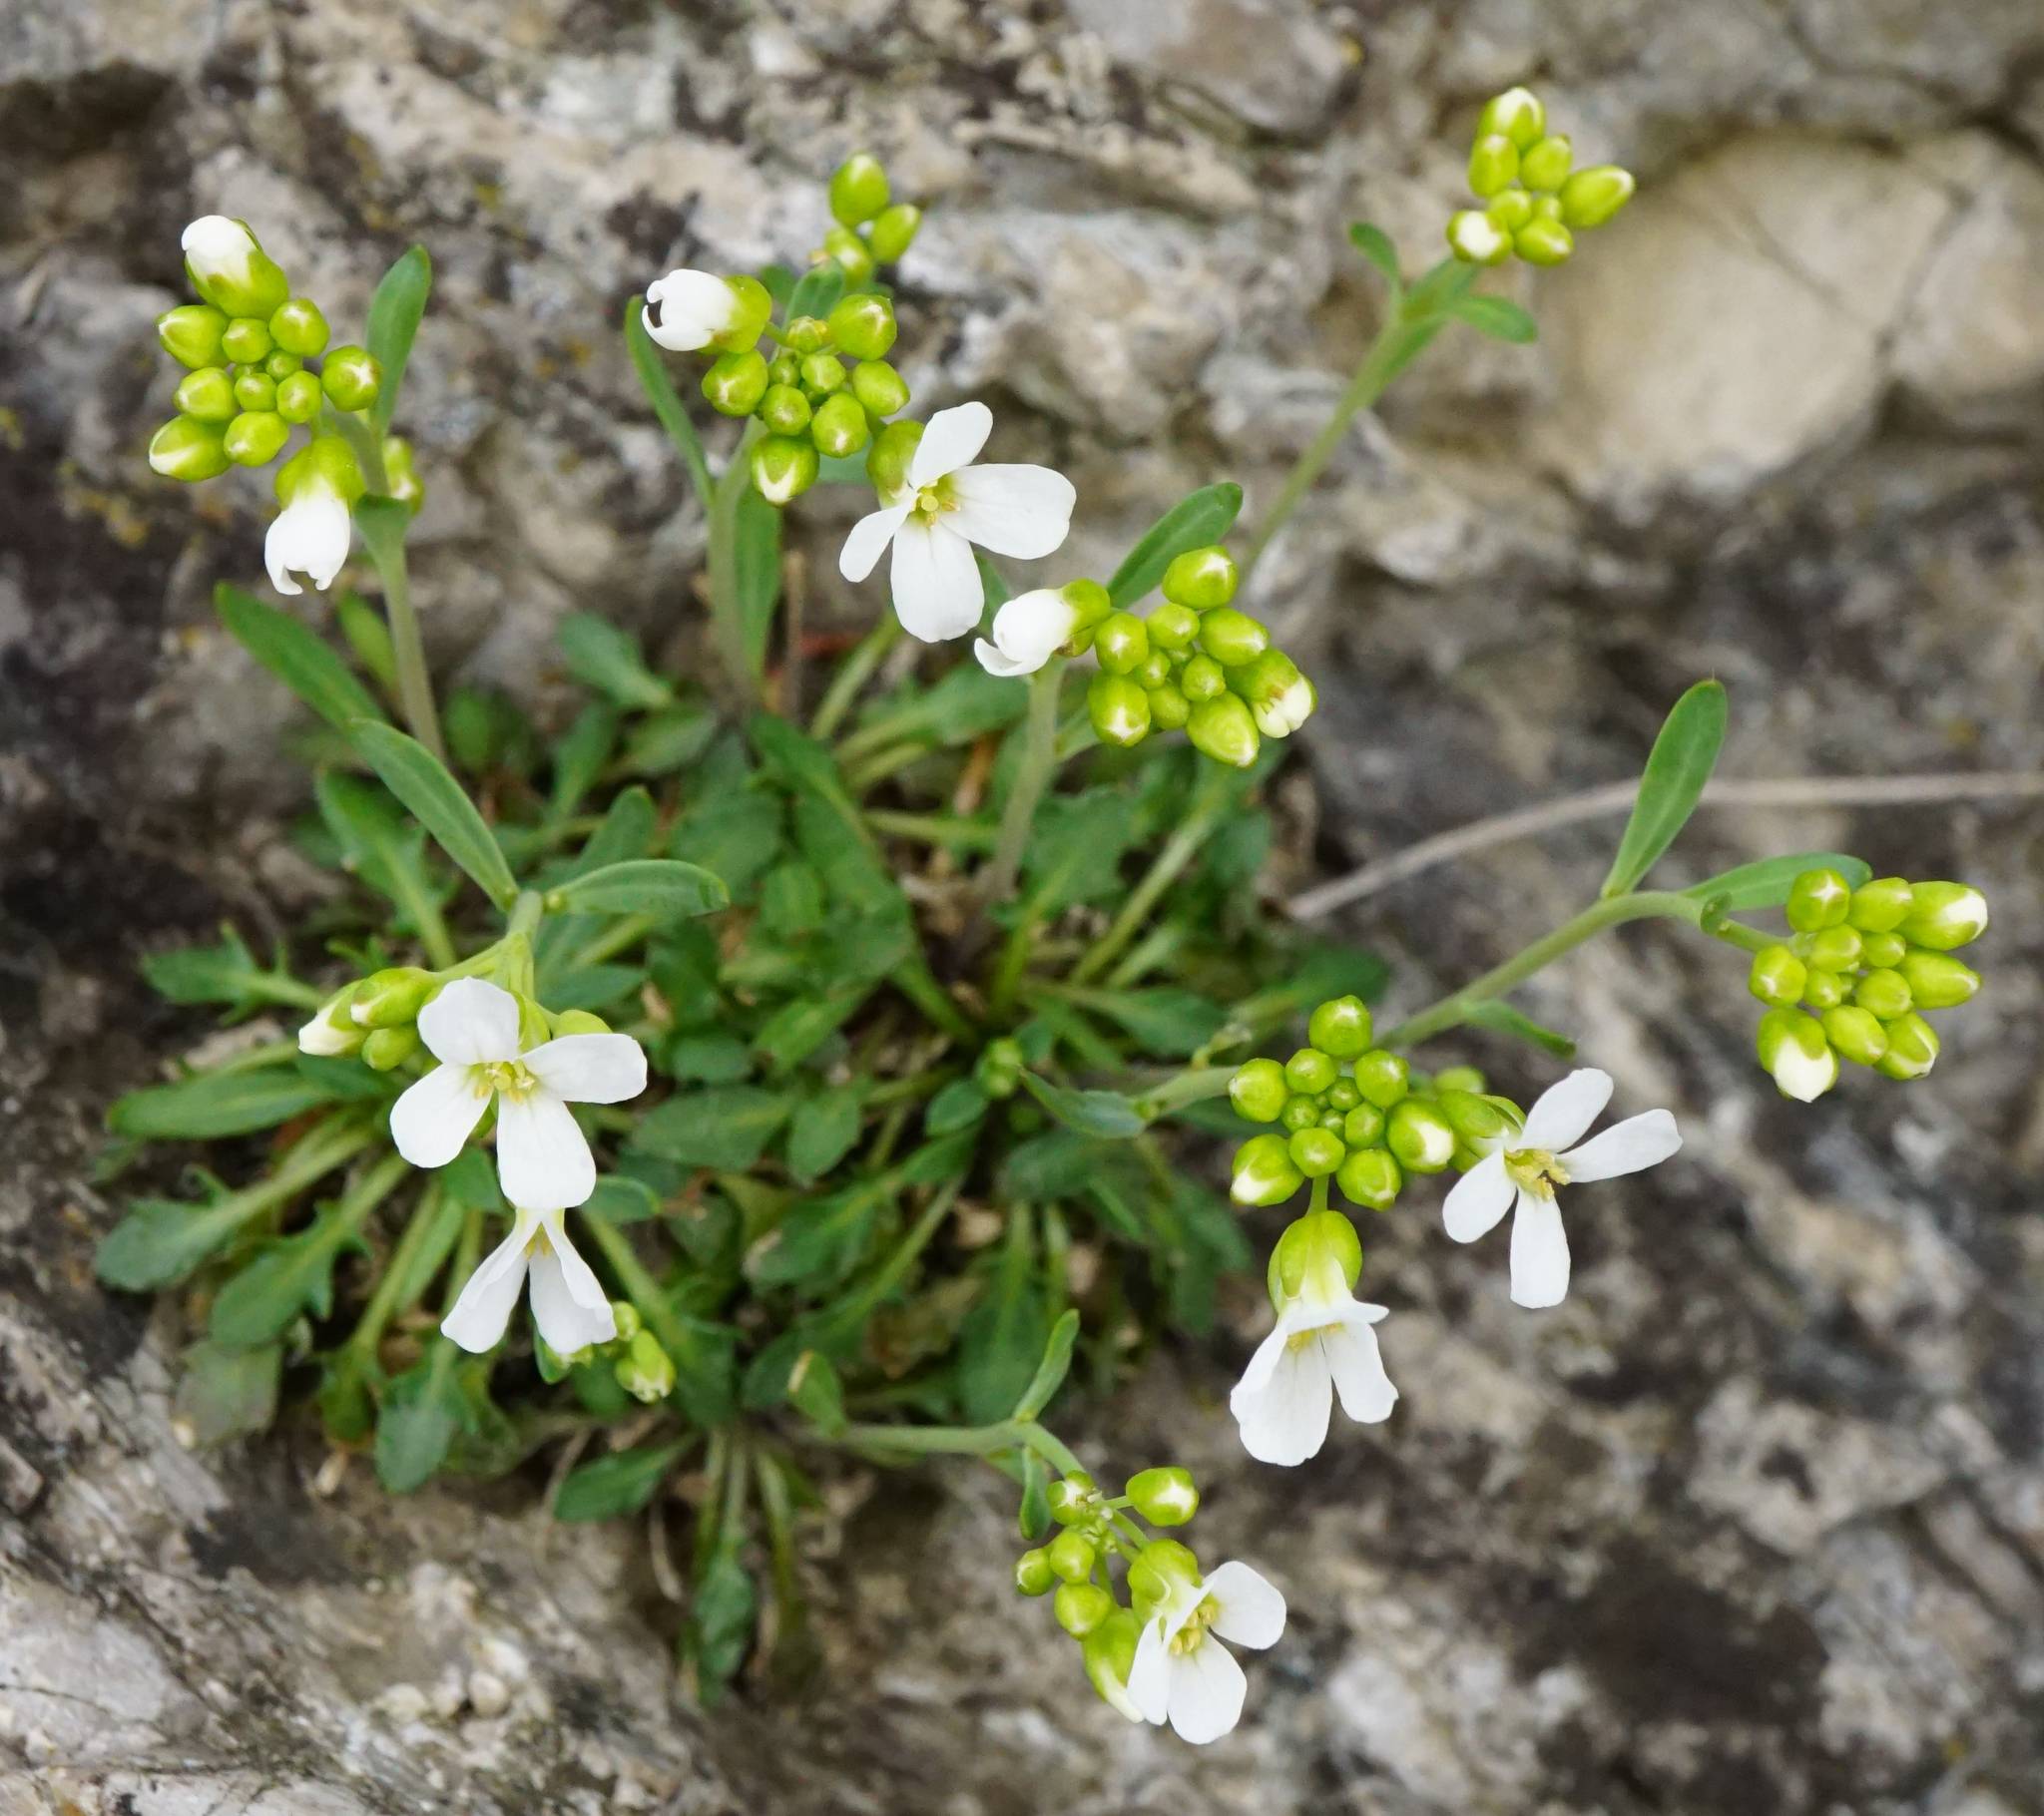 white flowers with yellow center, lime buds, green leaves and stems